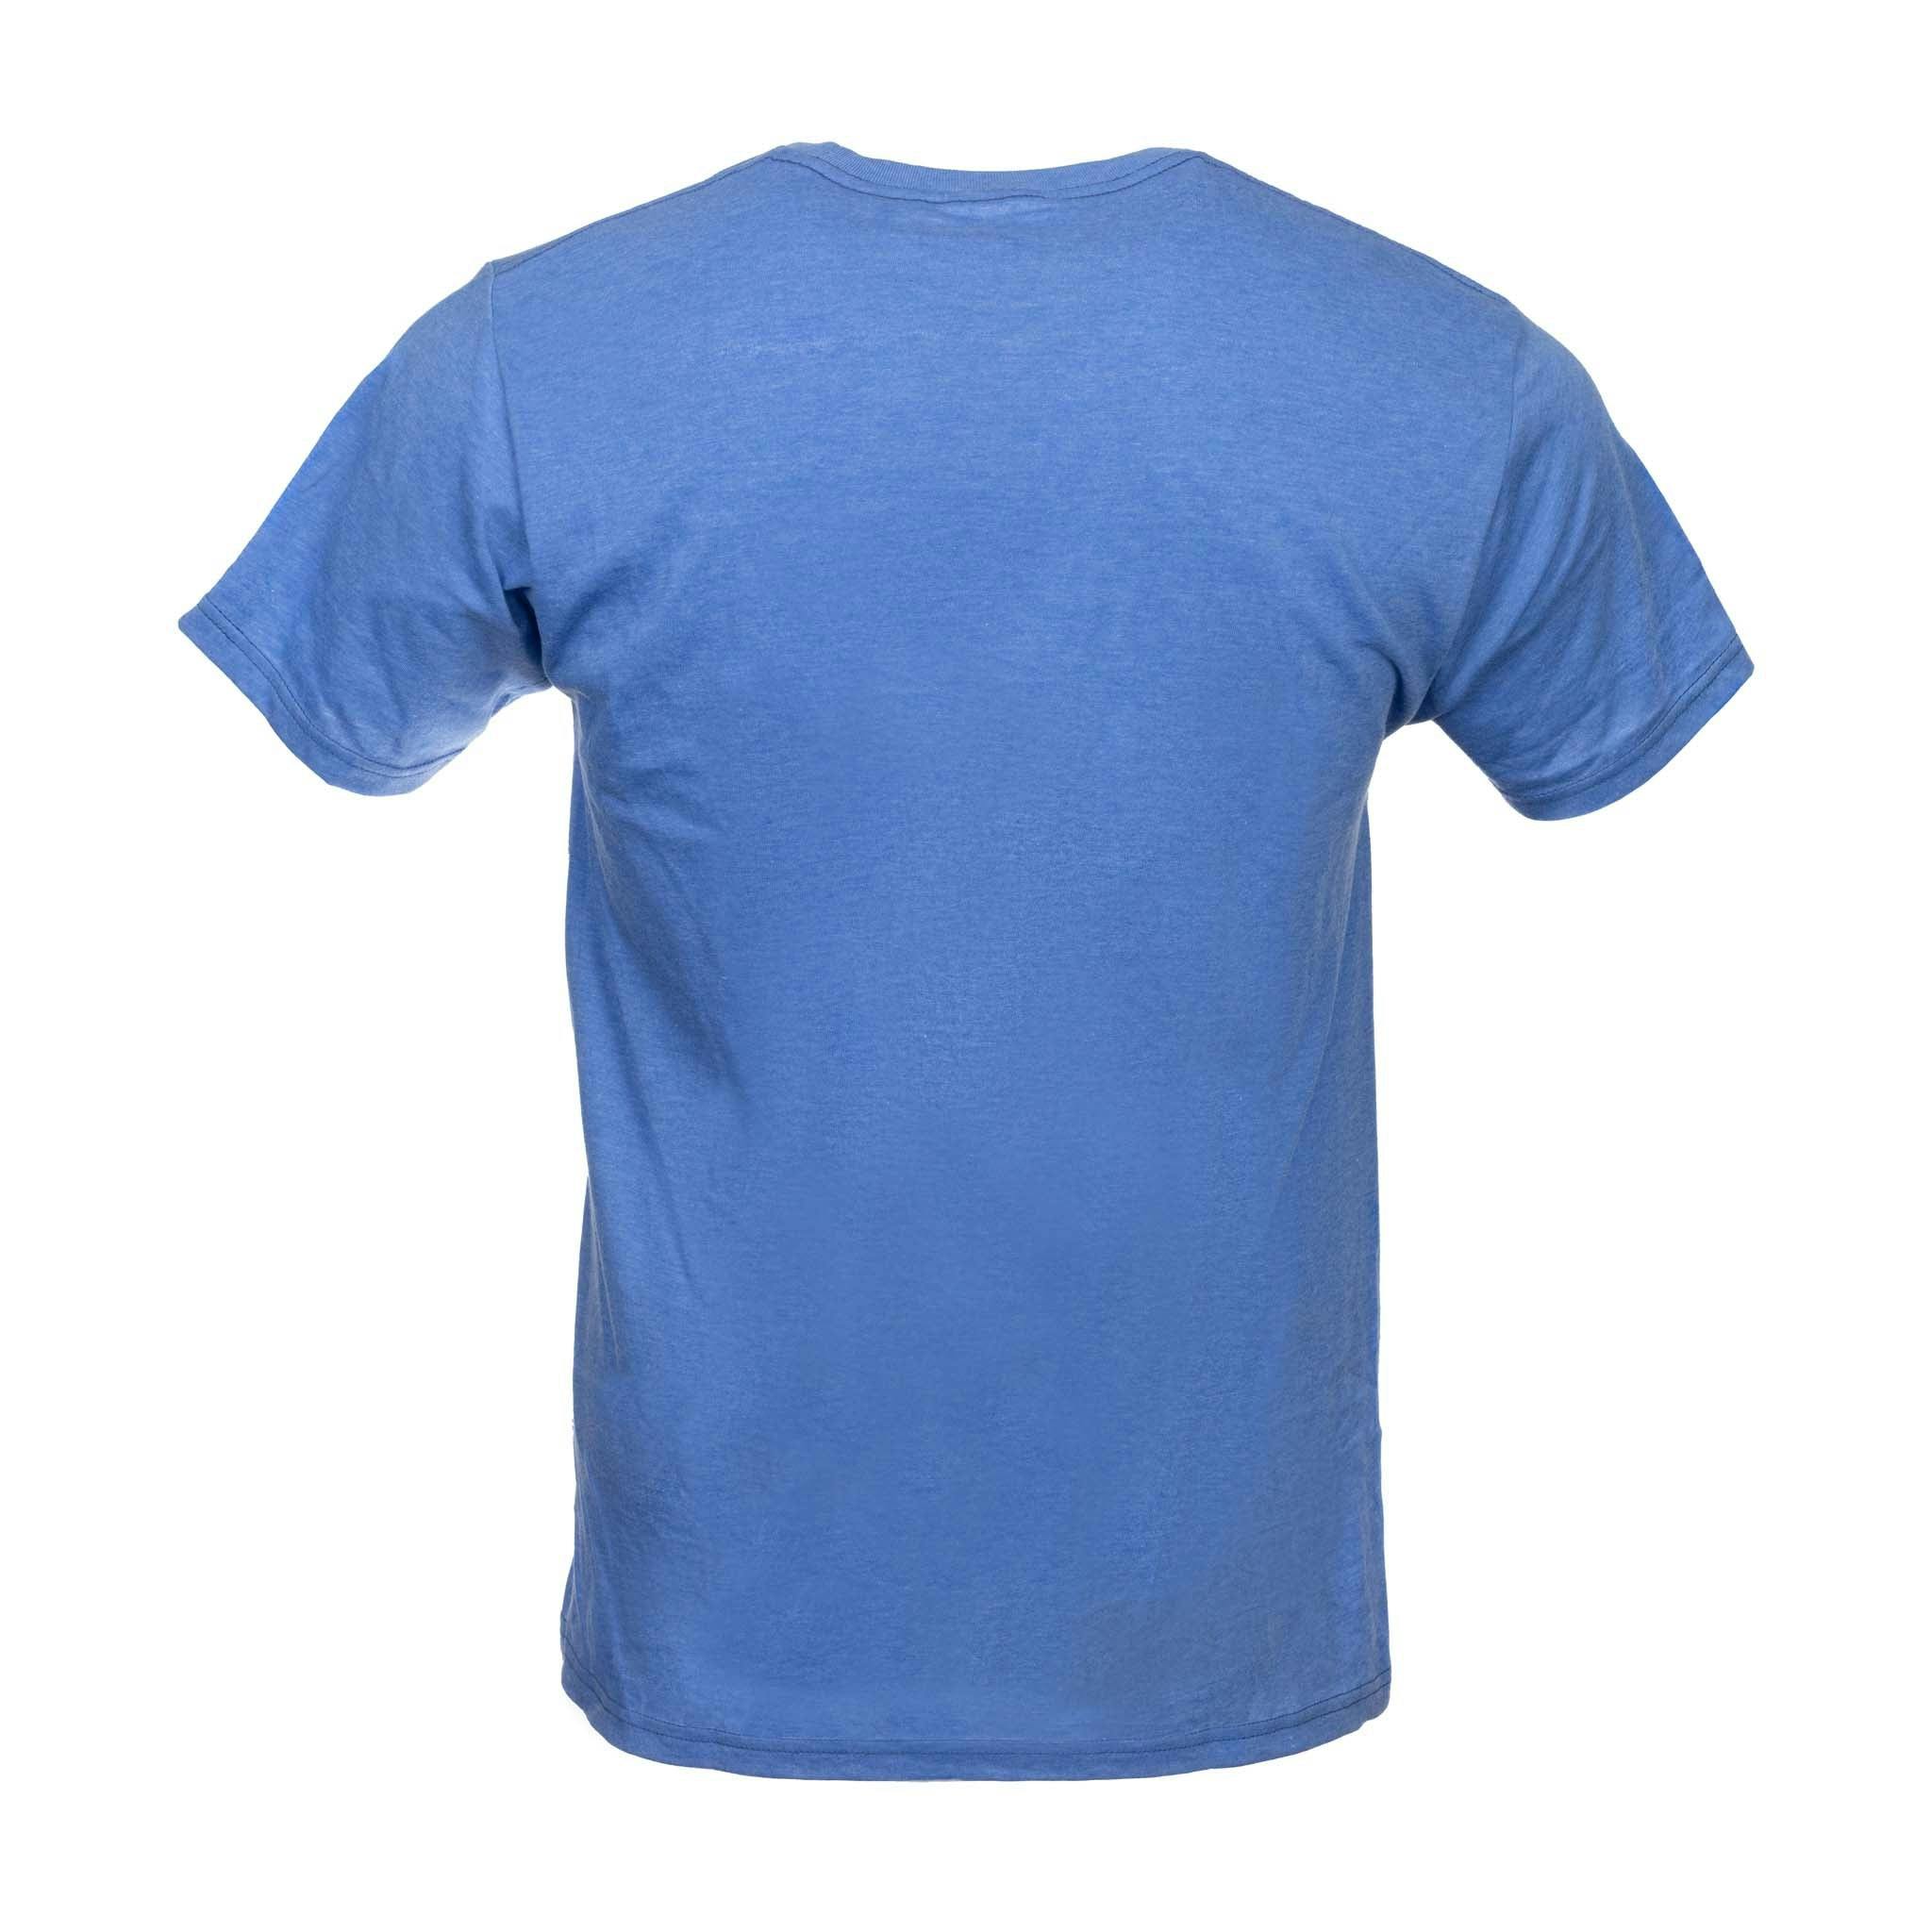 Sierra Nevada Handcrafted T-Shirt Electric Blue - Back view